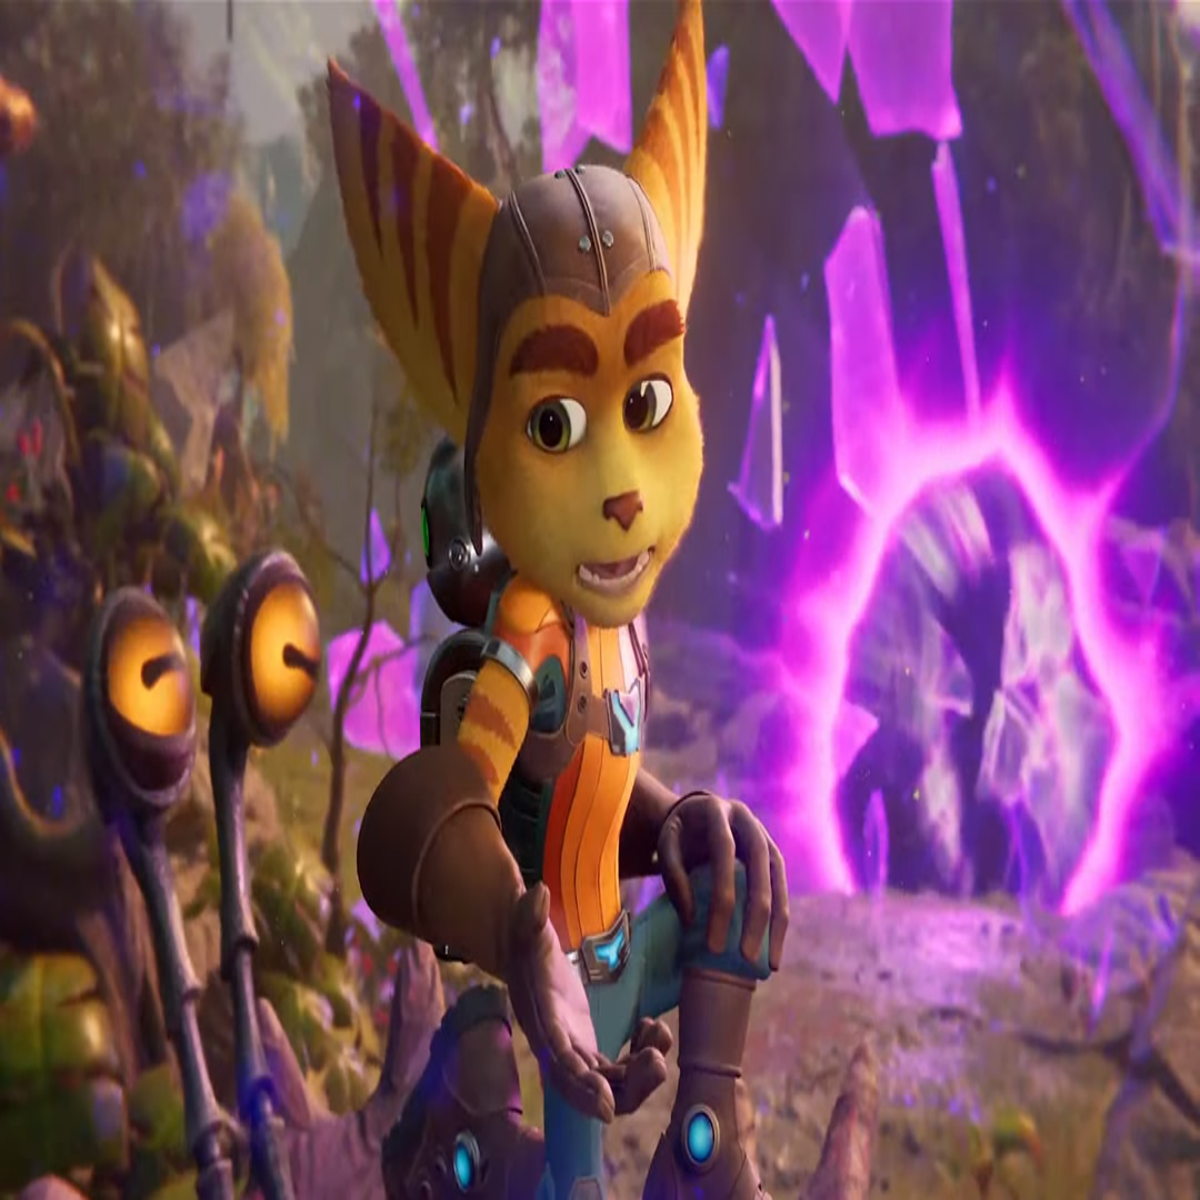 Ratchet & Clank: Rift Apart won't be on PS4, according to